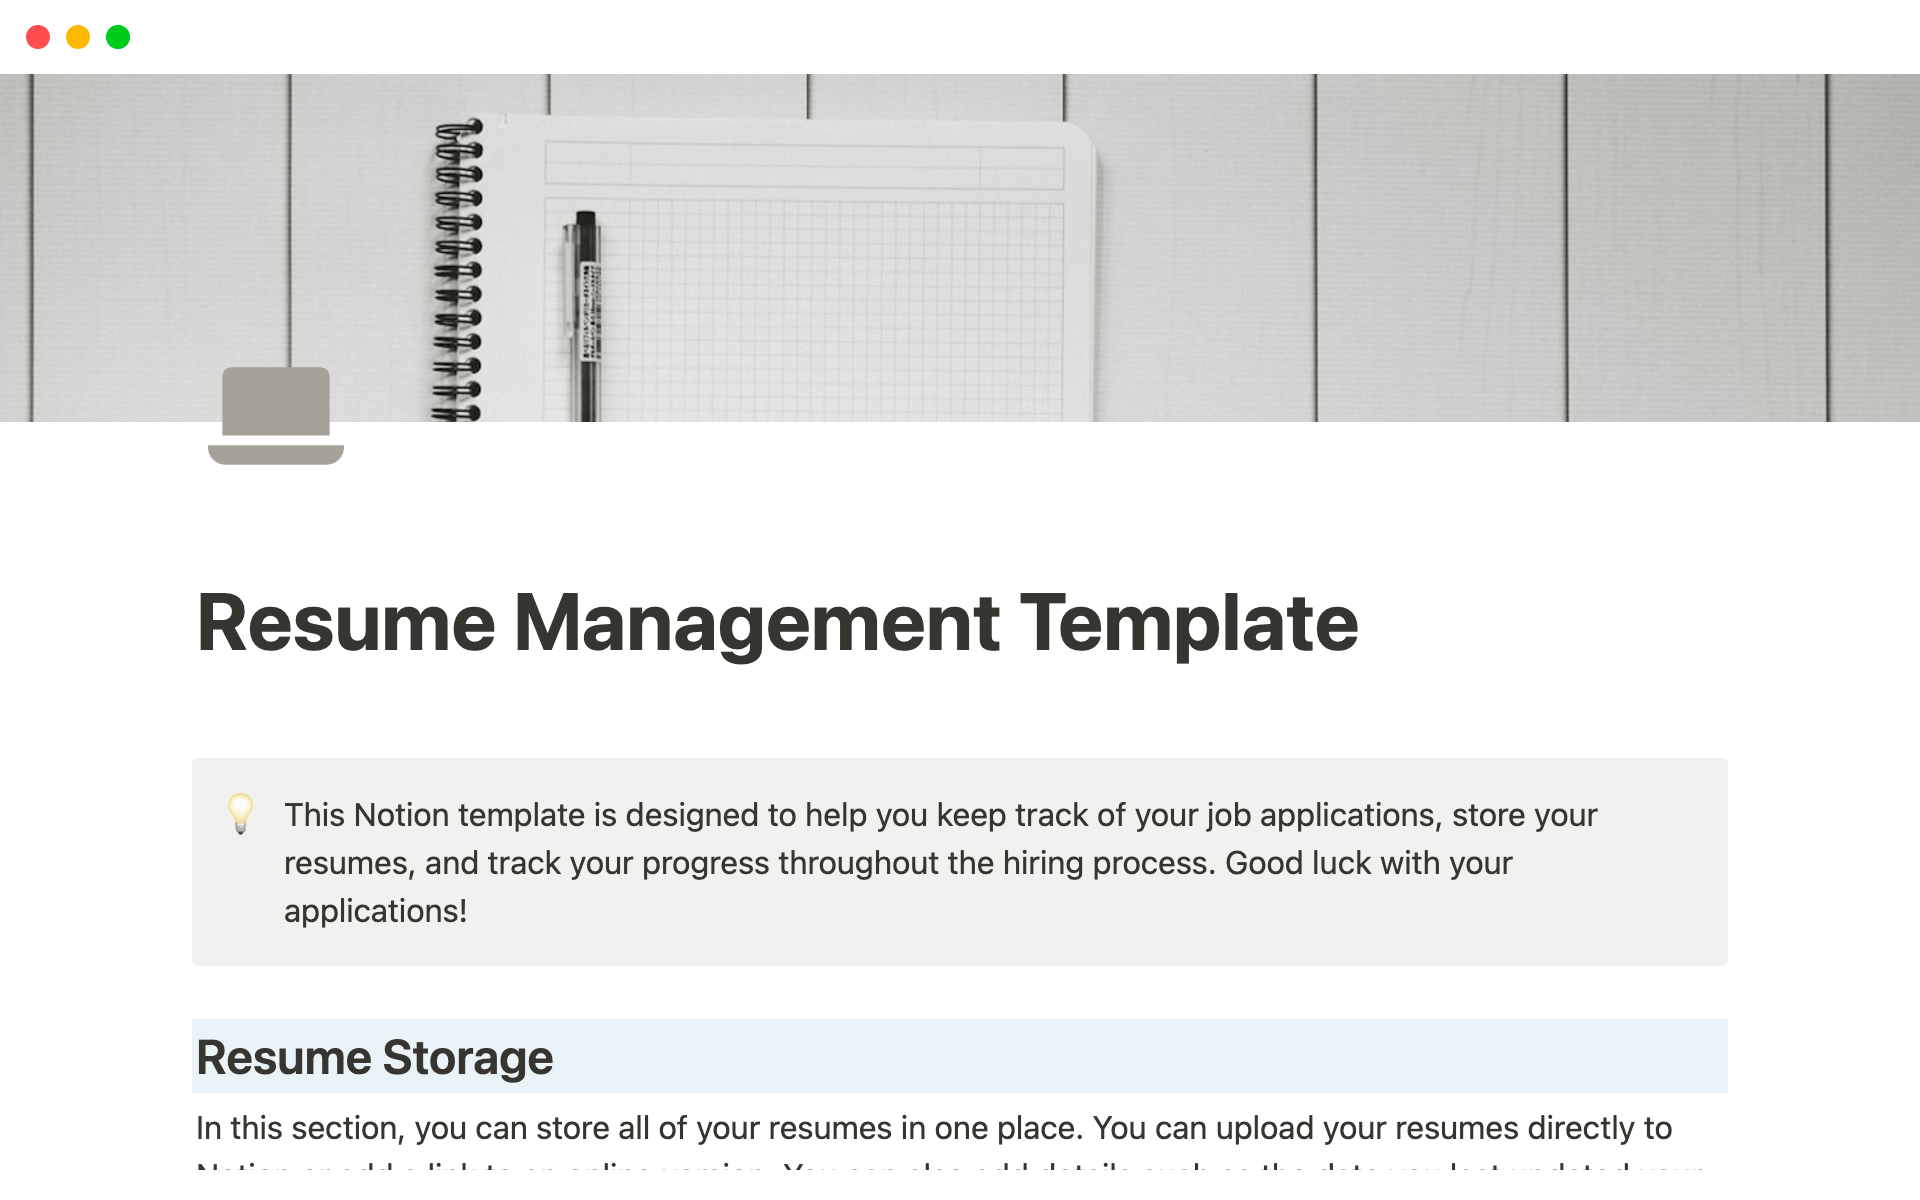 This Notion template is designed to help you keep track of your job applications, store your resumes, and track your progress throughout the hiring process.